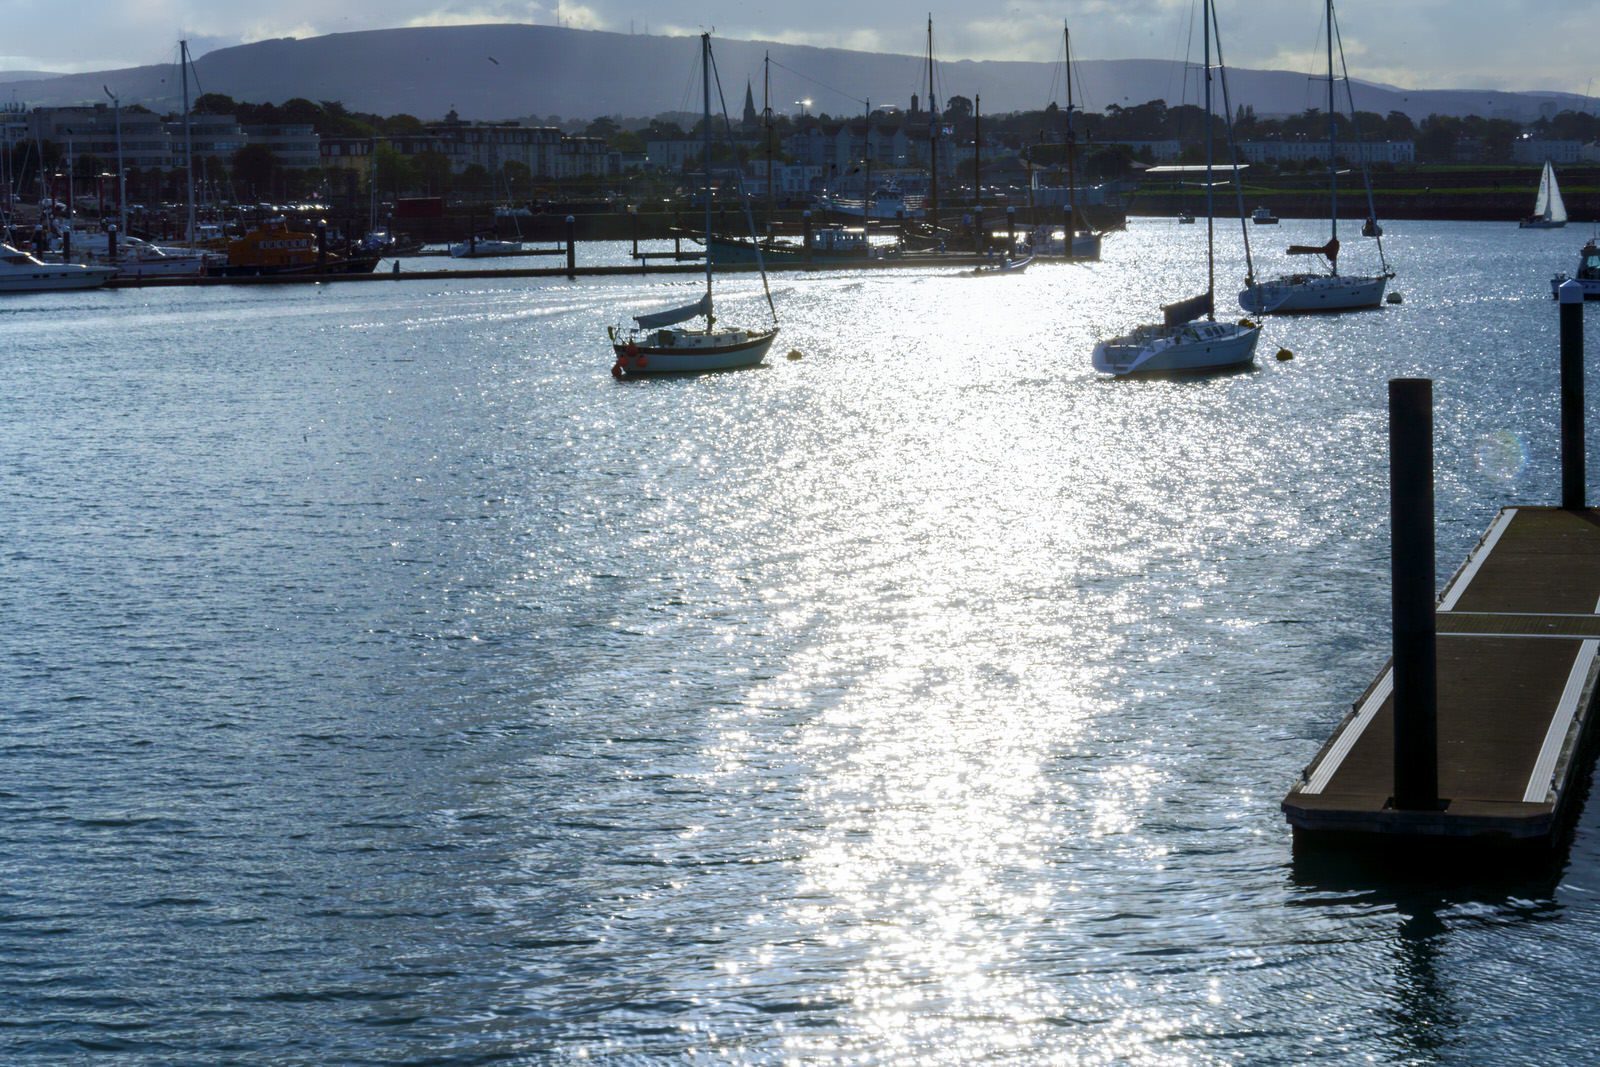 THE SECTION OF THE MARINA NEAR THE WESTERN BREAKWATER [DUN LAOGHAIRE HARBOUR] 013